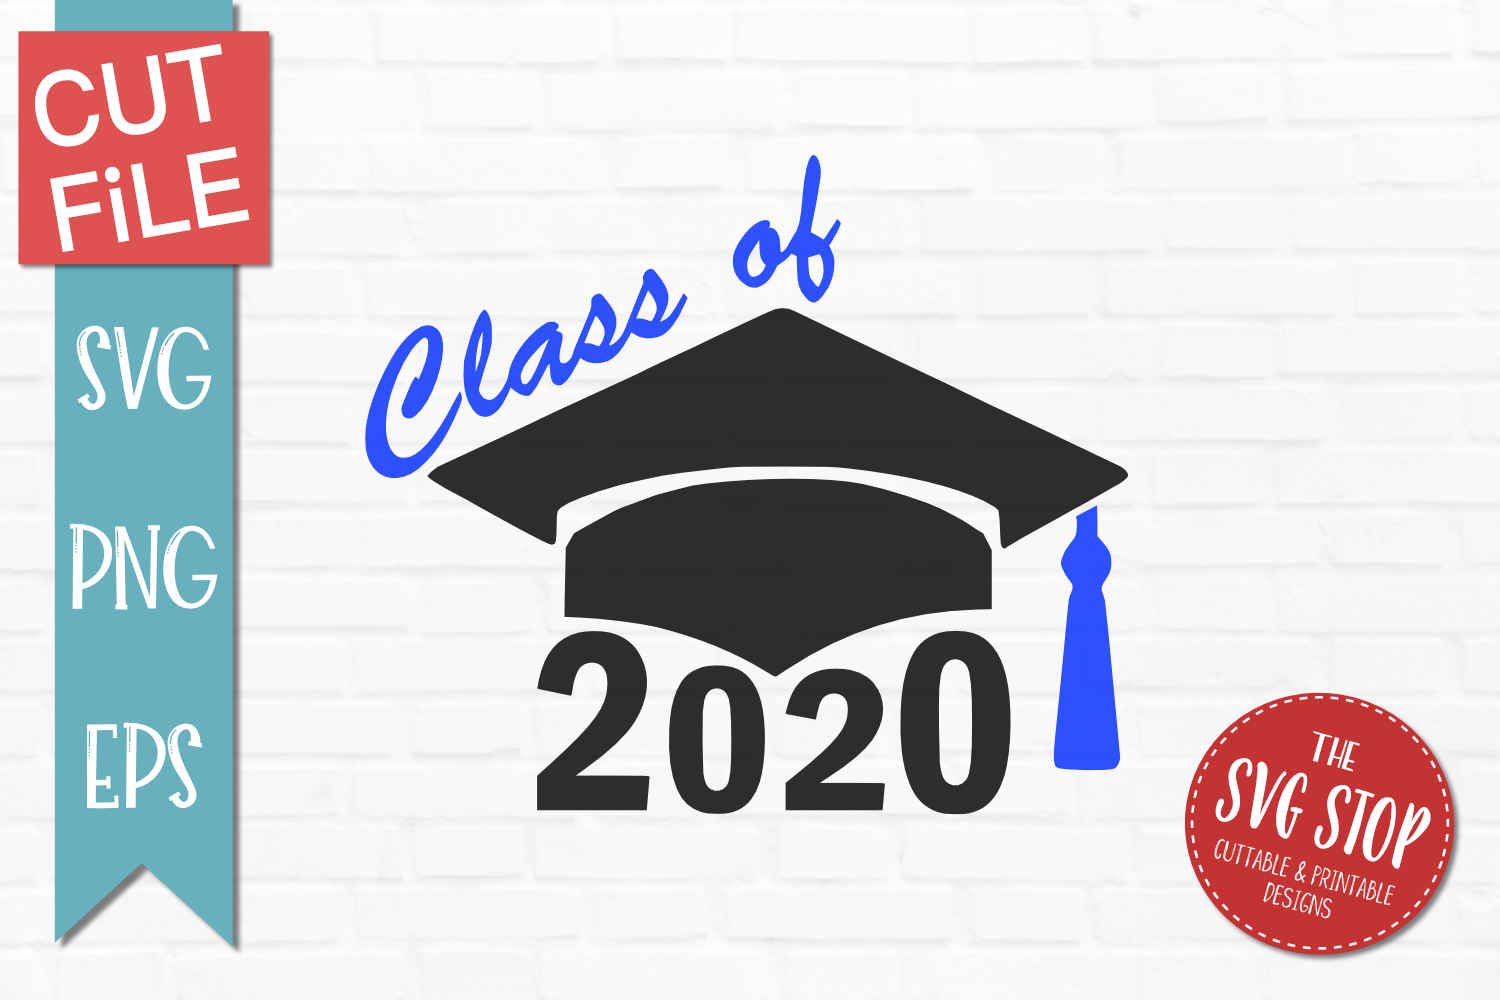 Download Class of 2020 Grad Cap-SVG, PNG, EPS (313469) | SVGs ...